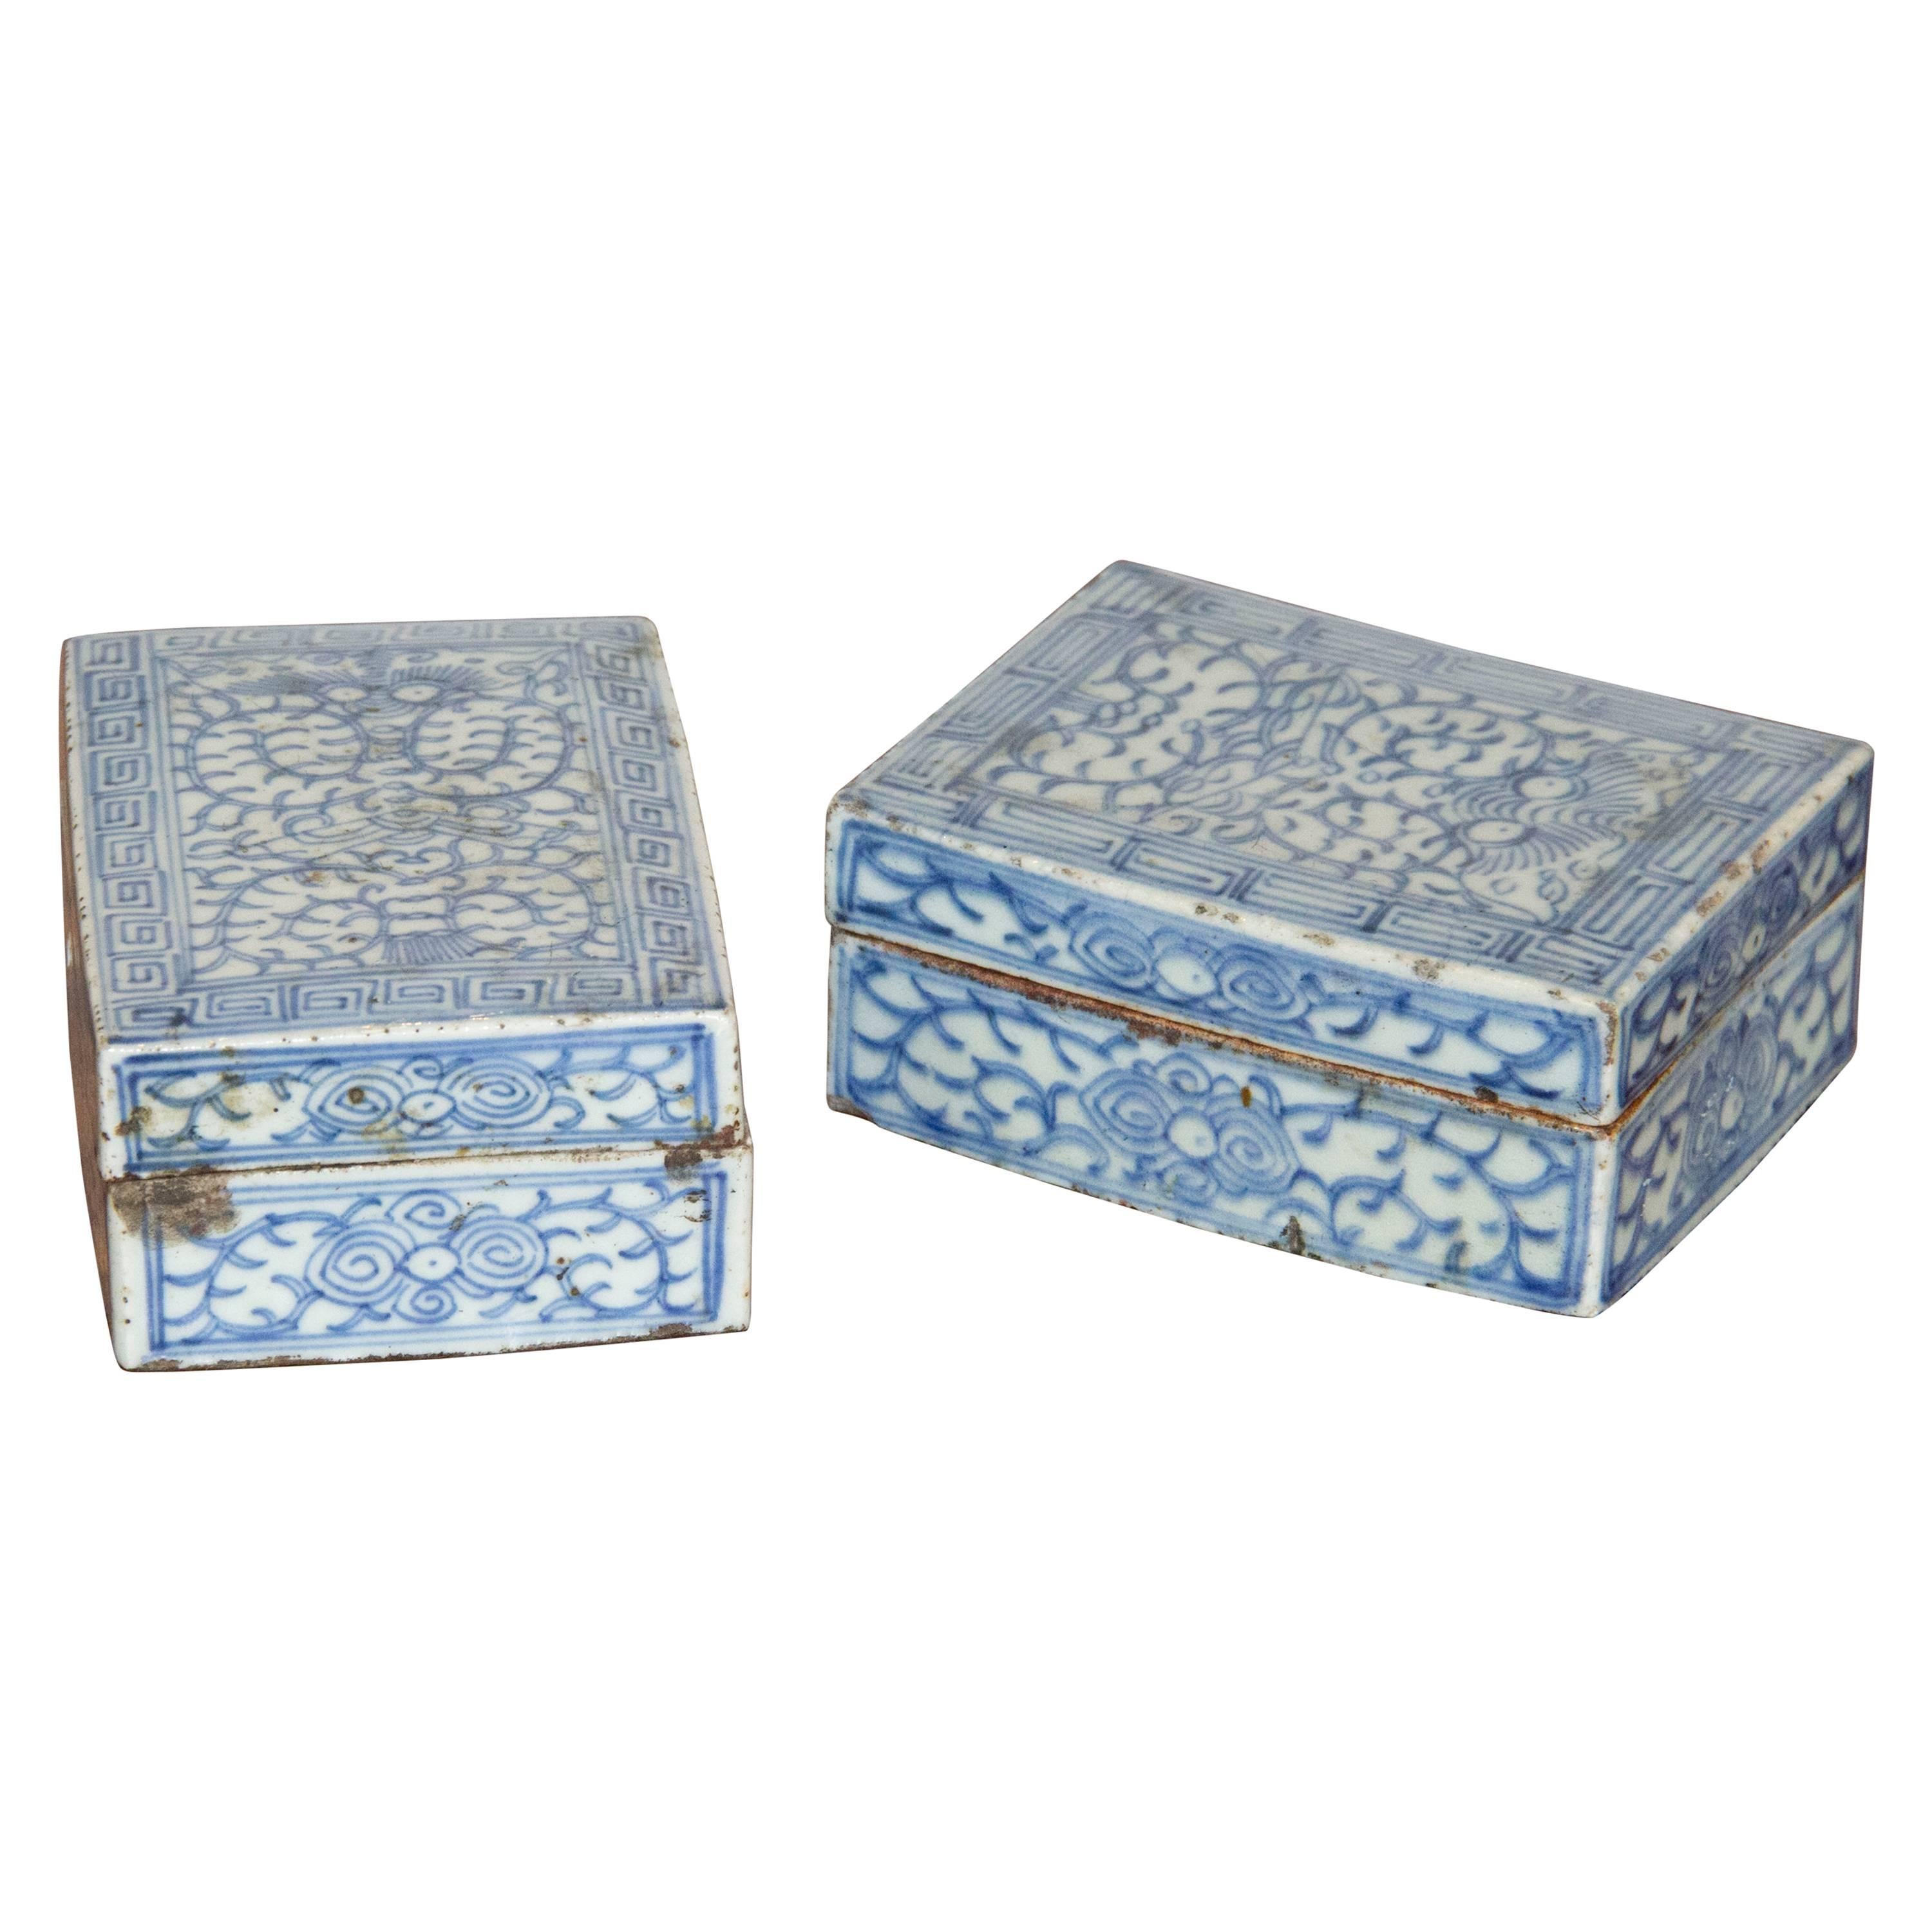 Pair of Blue and White Painted Chinese Porcelain Lidded Boxes